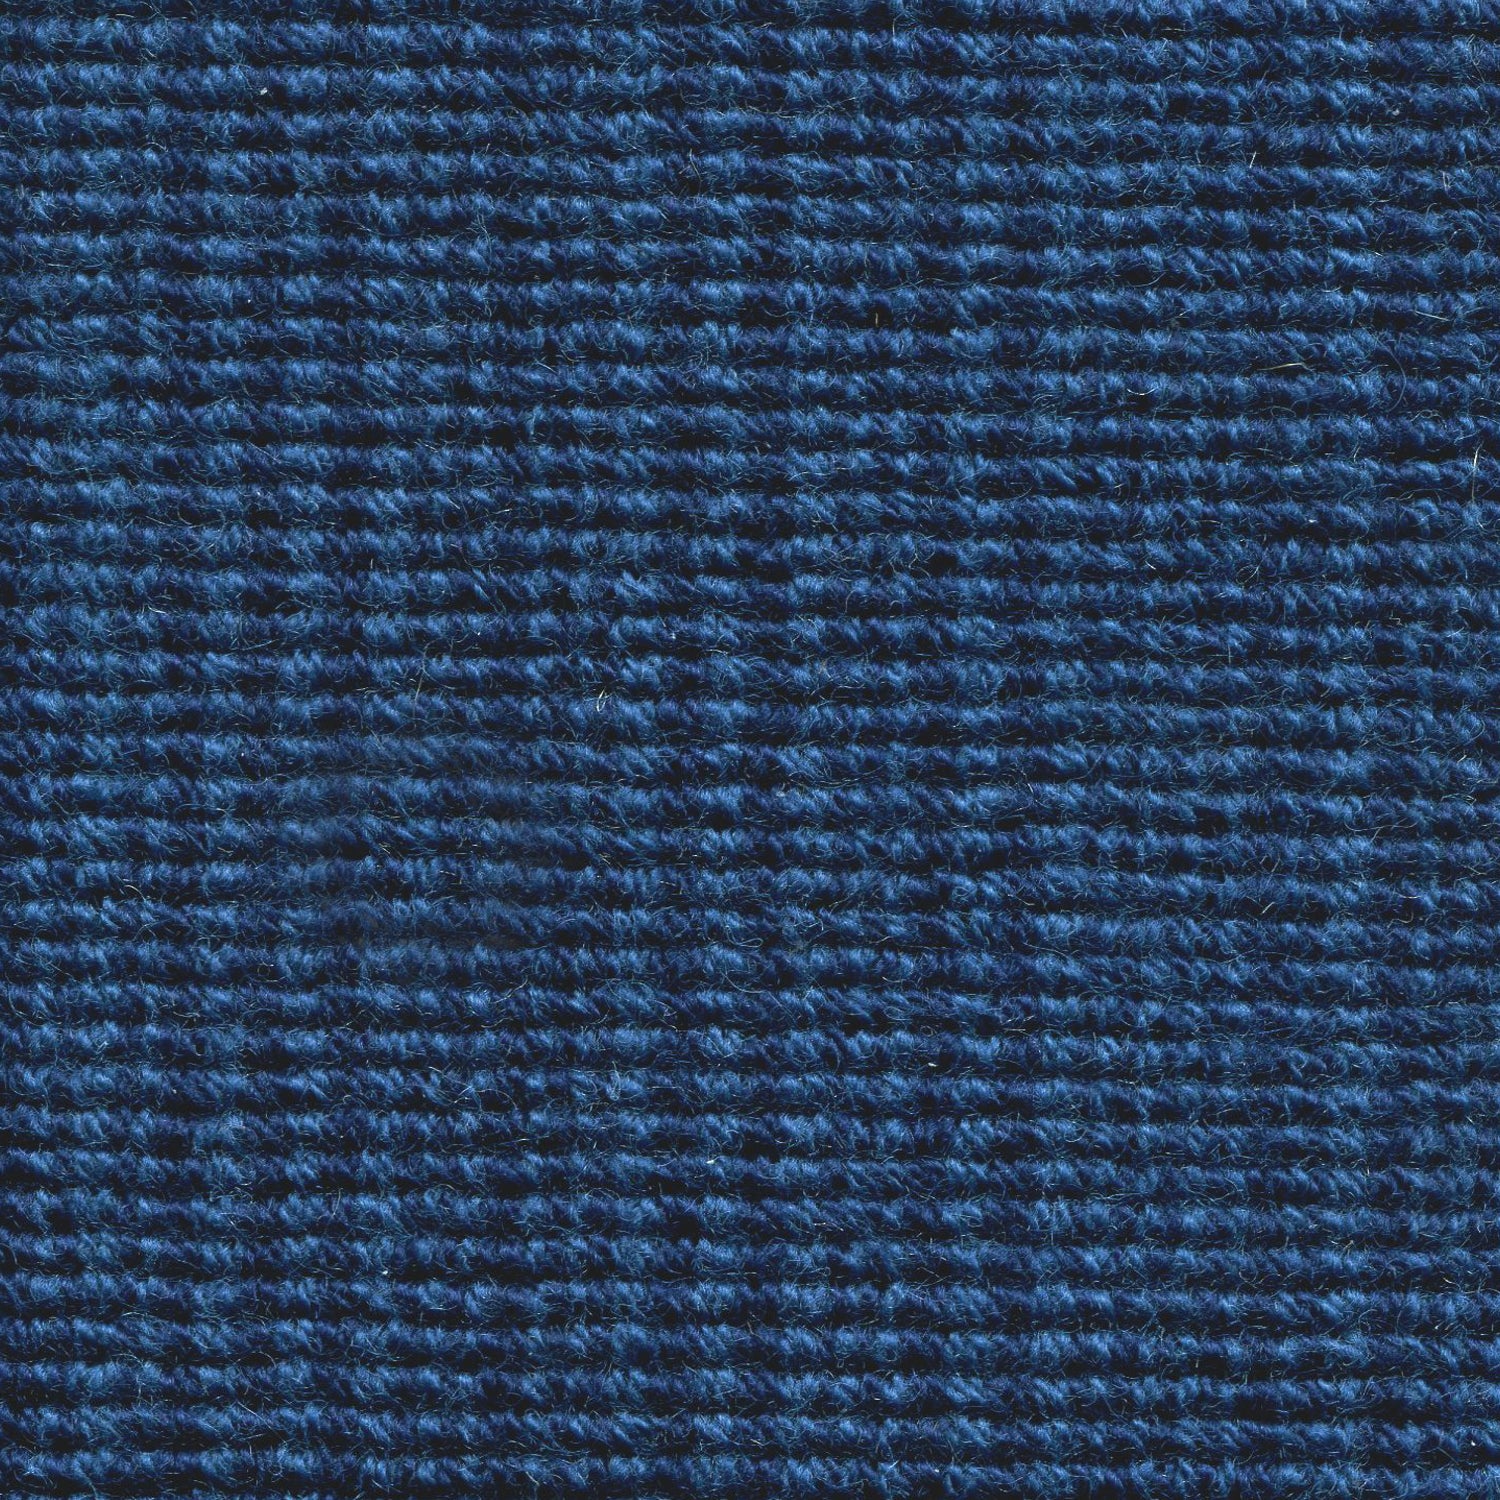 Wool broadloom carpet swatch in a chunky striped weave in blue and navy.